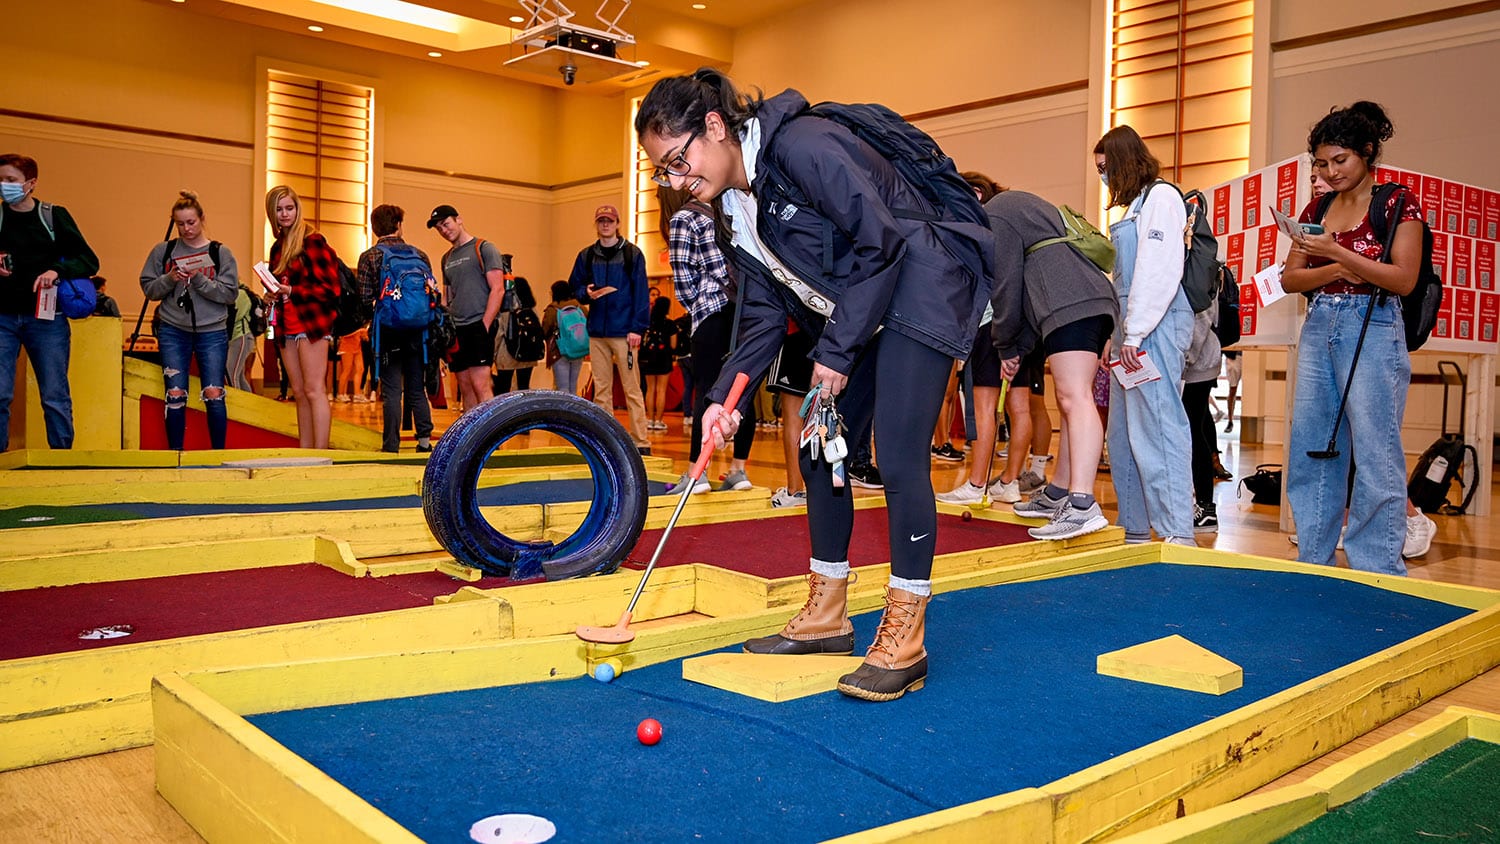 A student plays mini golf at the 2022 Day of Giving student event